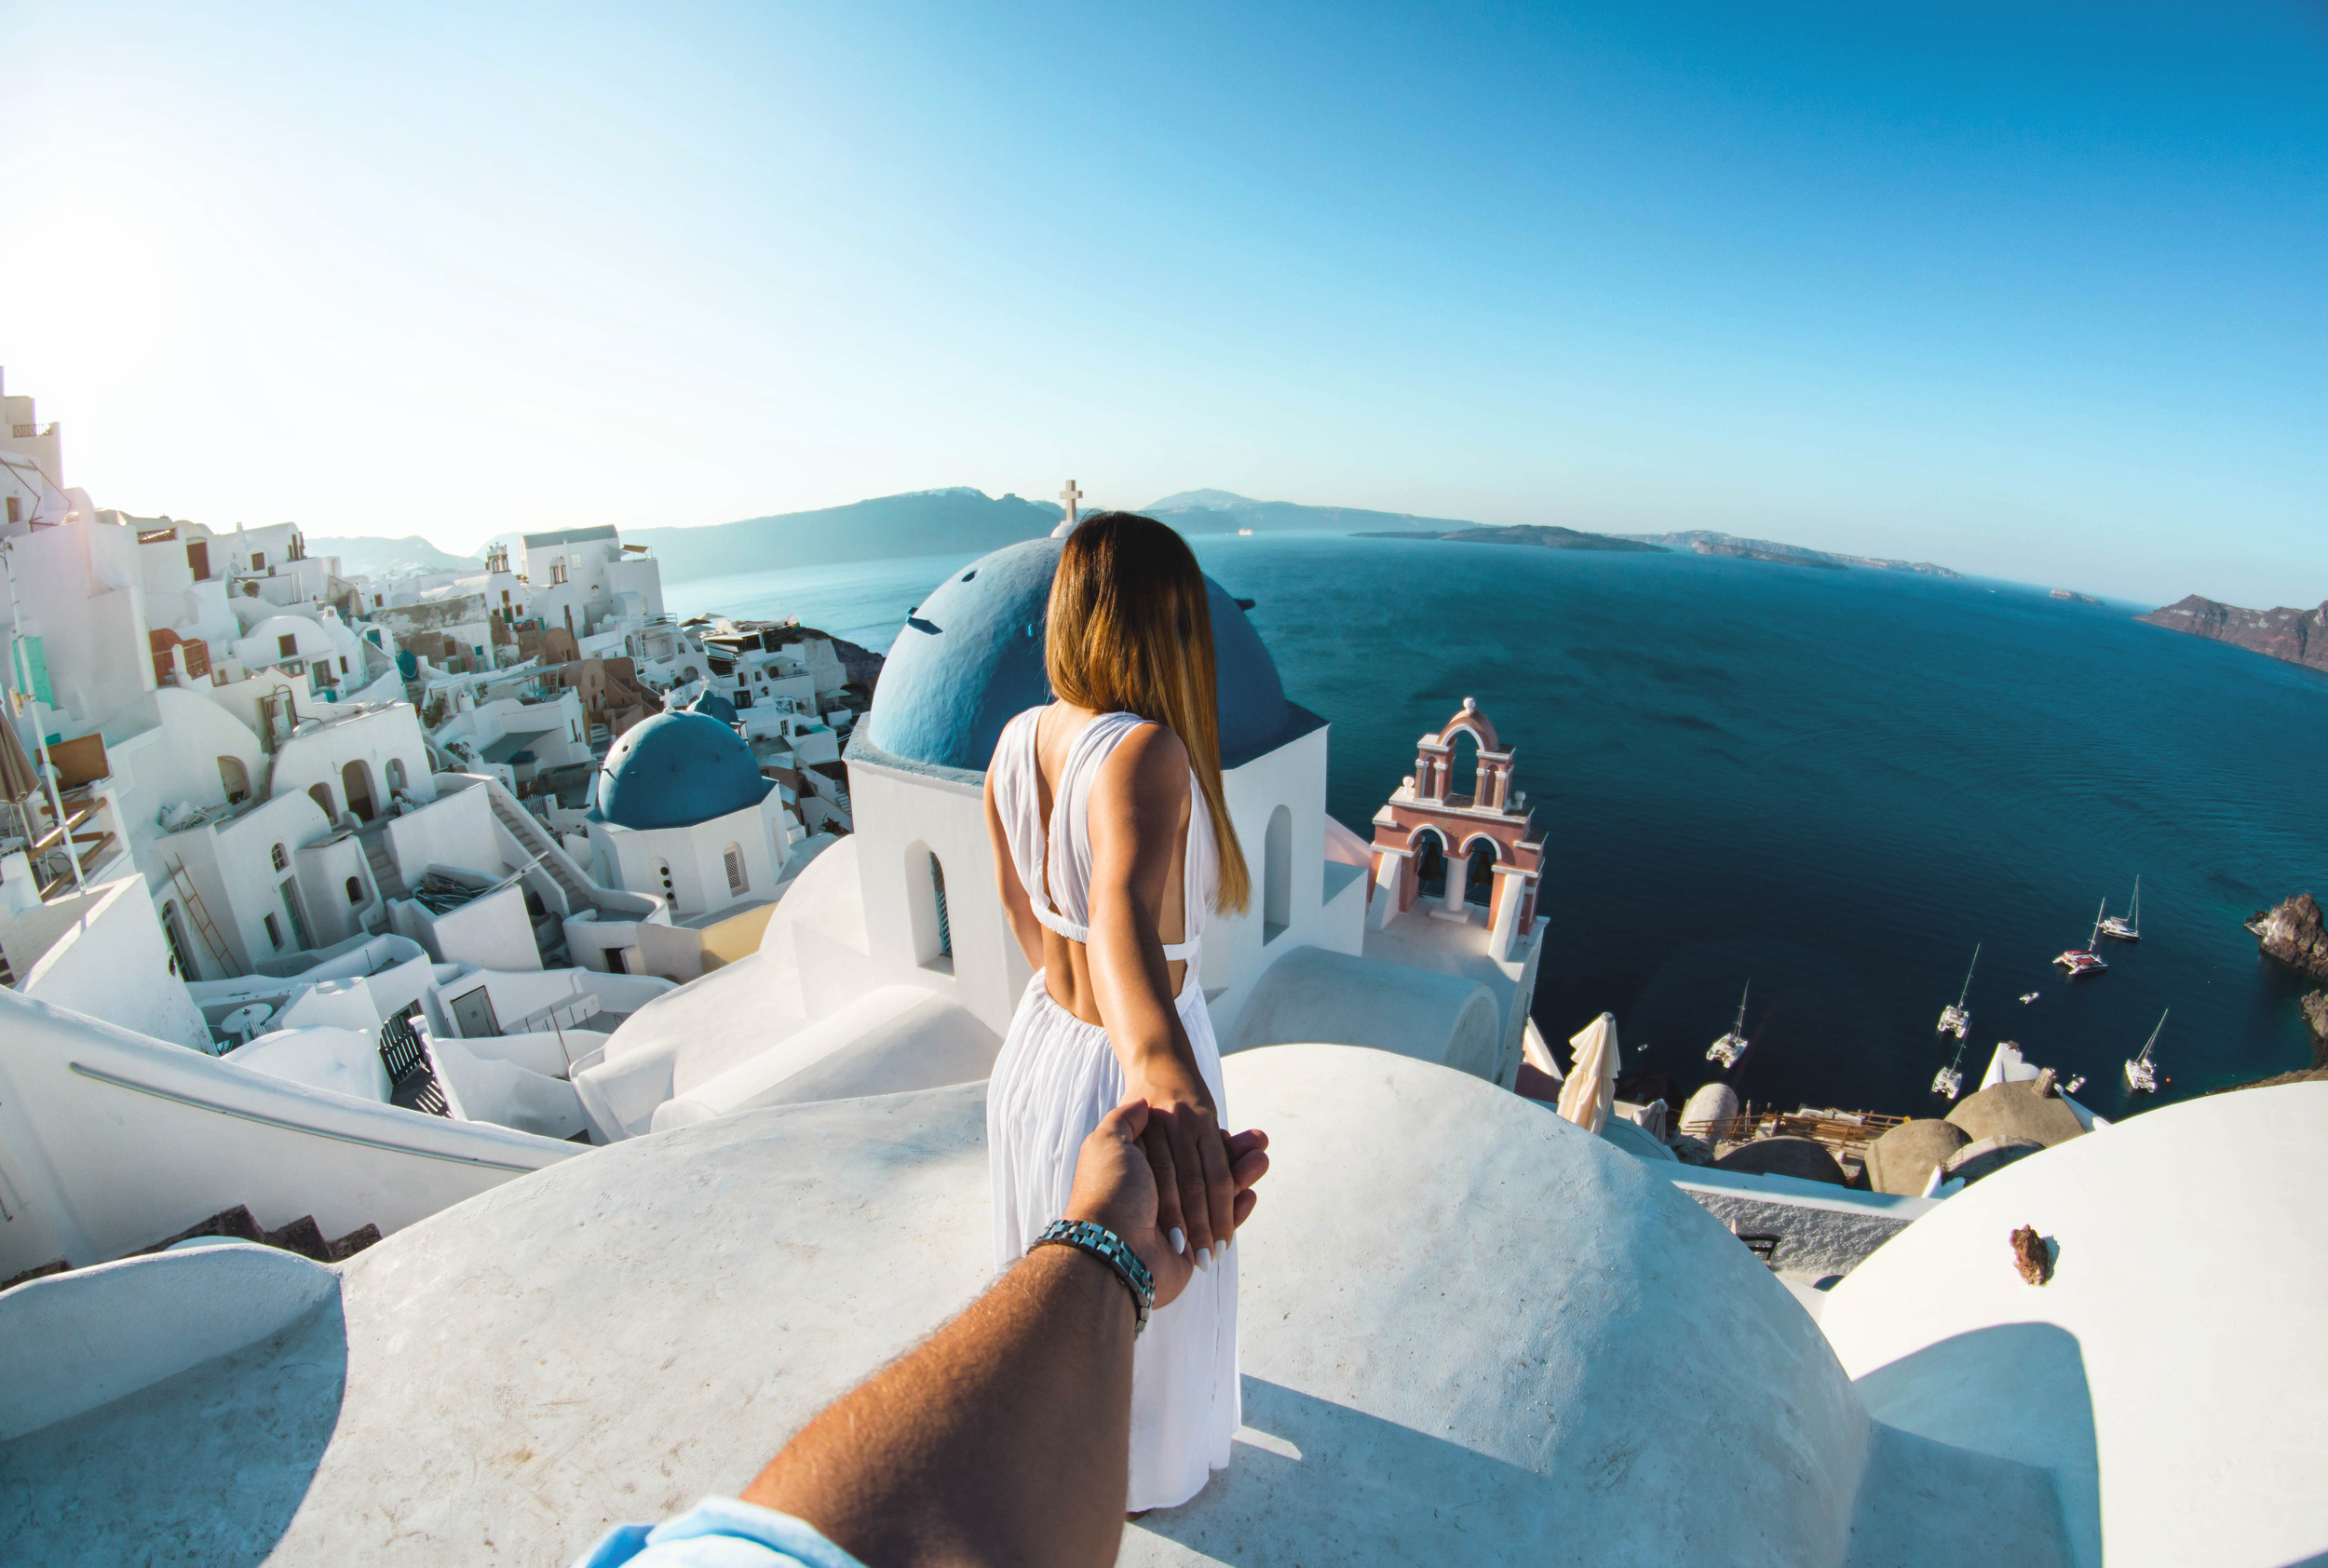 <p>Santorini is what most people imagine when thinking of a stereotypical Greek island. Its whitewashed homes with iconic blue roofs, set against the sparkling Mediterranean, are what romantic dreams are made of.</p><p><a href='https://www.msn.com/en-us/community/channel/vid-cj9pqbr0vn9in2b6ddcd8sfgpfq6x6utp44fssrv6mc2gtybw0us'>Follow us on MSN to see more of our exclusive lifestyle content.</a></p>